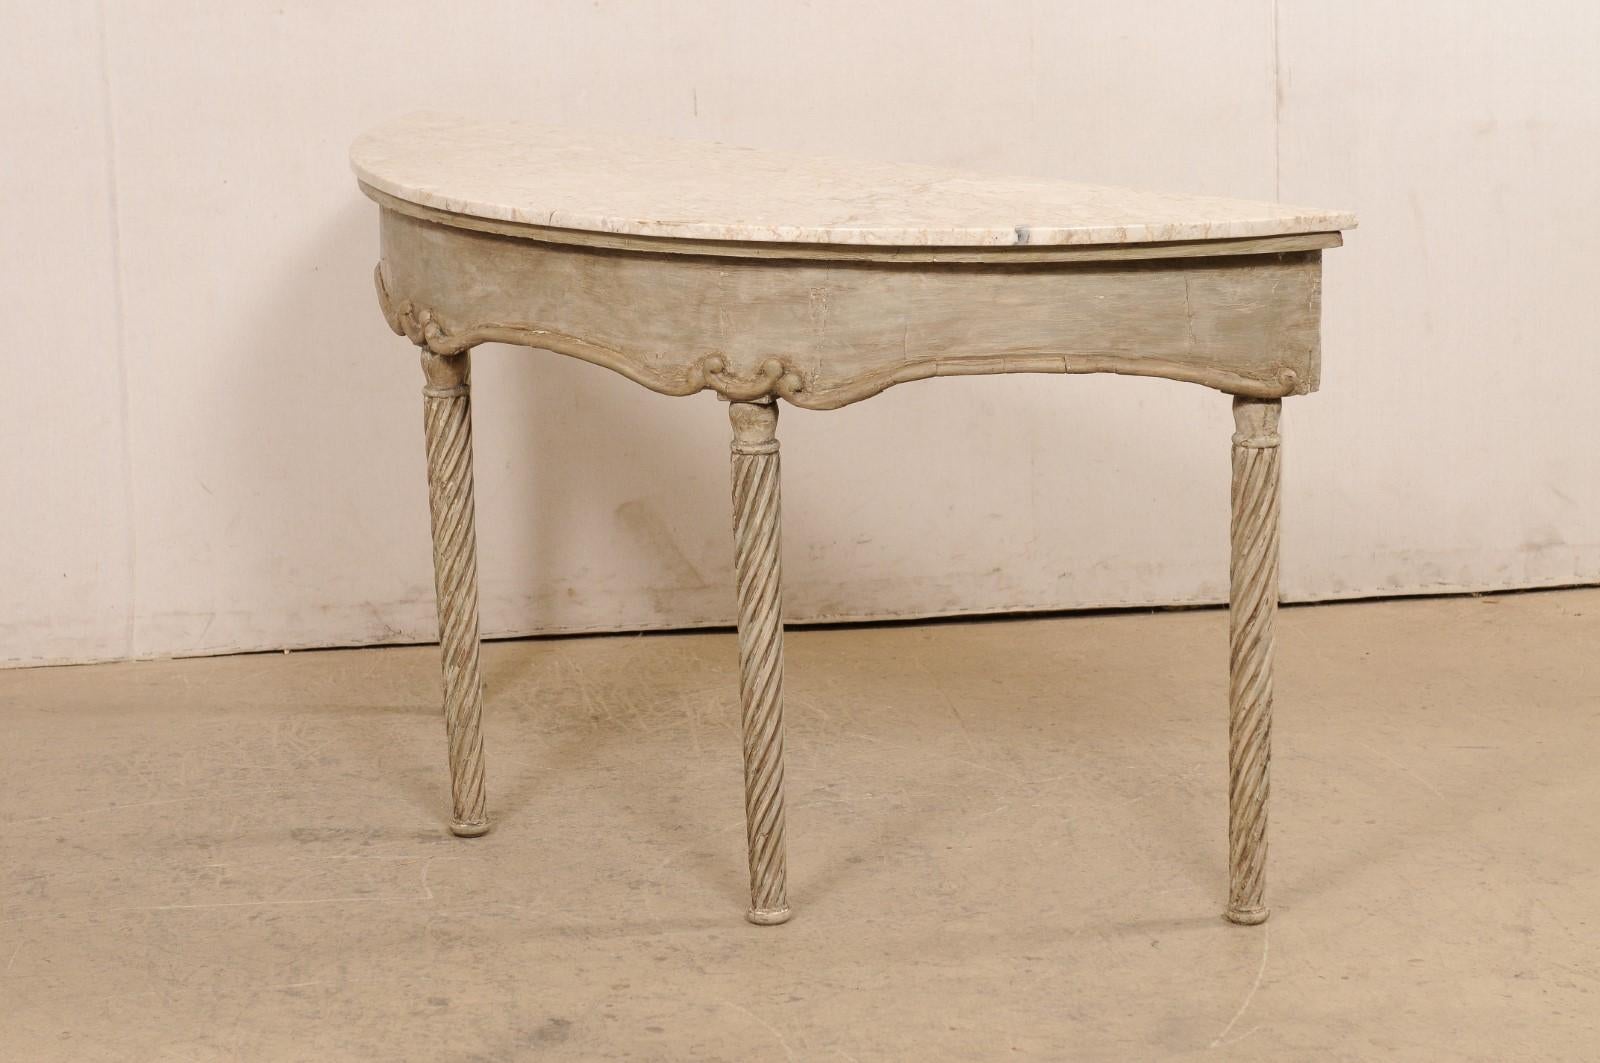 18th Century French Marble Top Console w/Spiral Carved Legs, Oblong Demi-Shaped For Sale 7